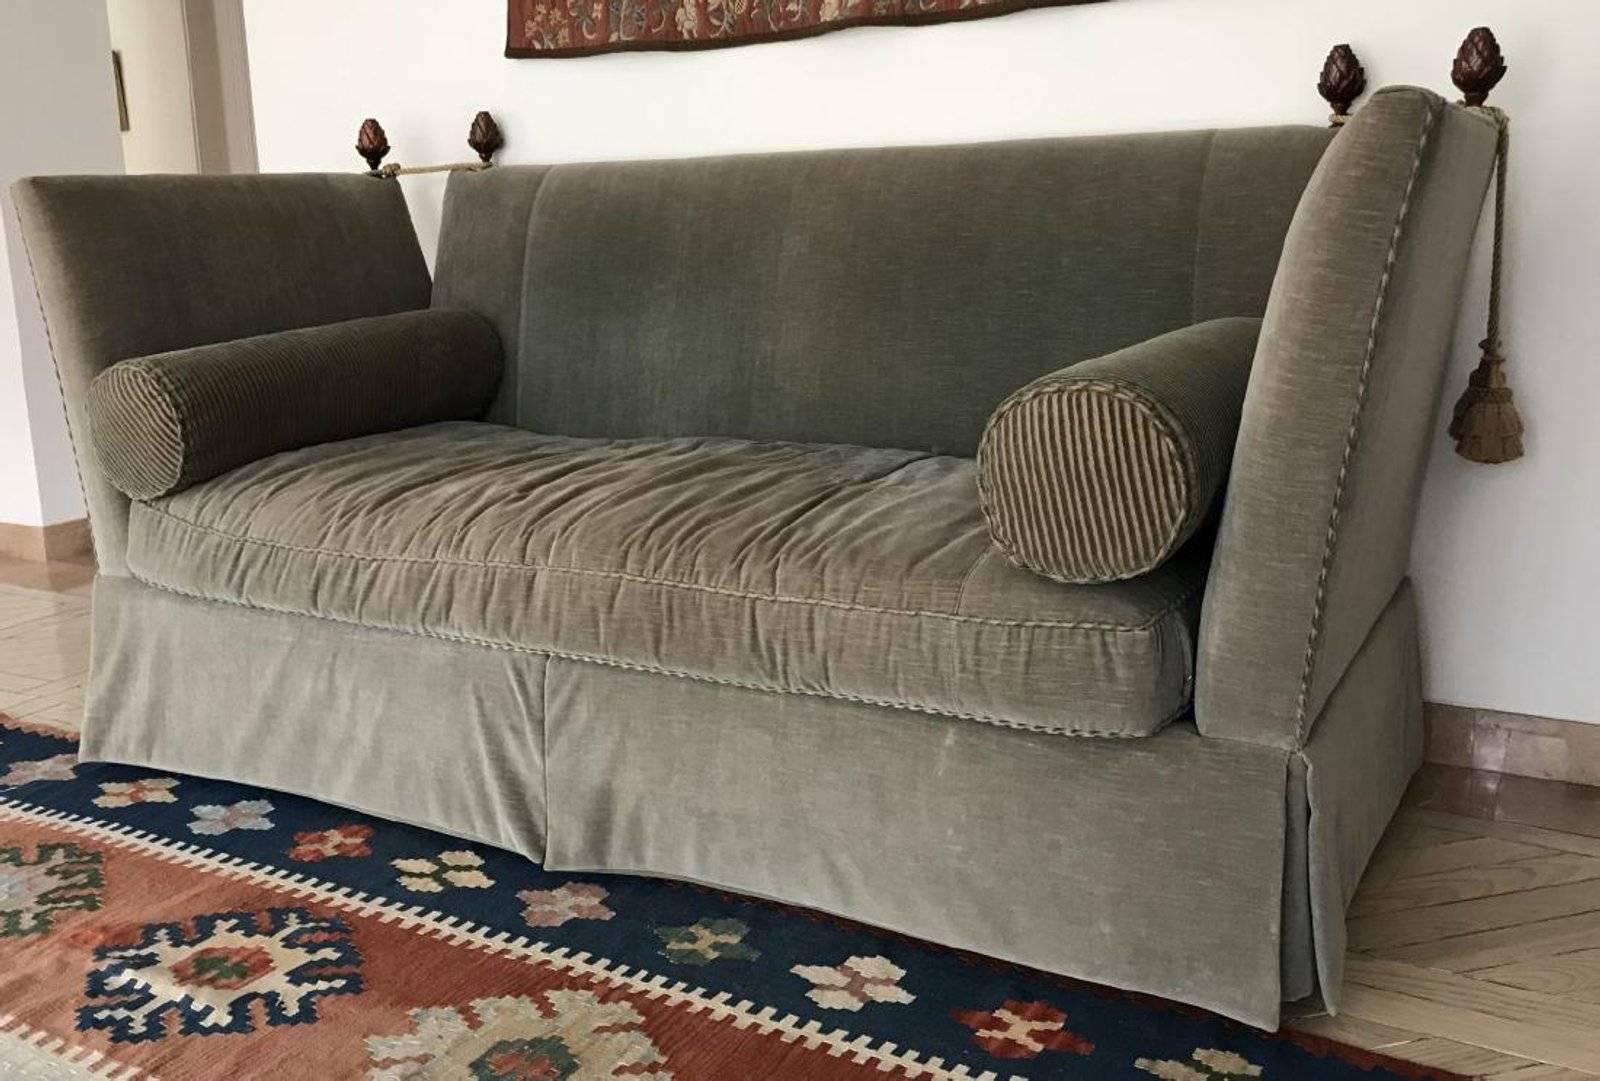 Elegant custom upholstered vintage sofa adorned with finials, tassels and pair of bolster pillows. Measures 46 x 88 x 39 inches. Upholstered in grey velvet with contrasting striped welt. This is a 1980s copy of the original style that dates back to